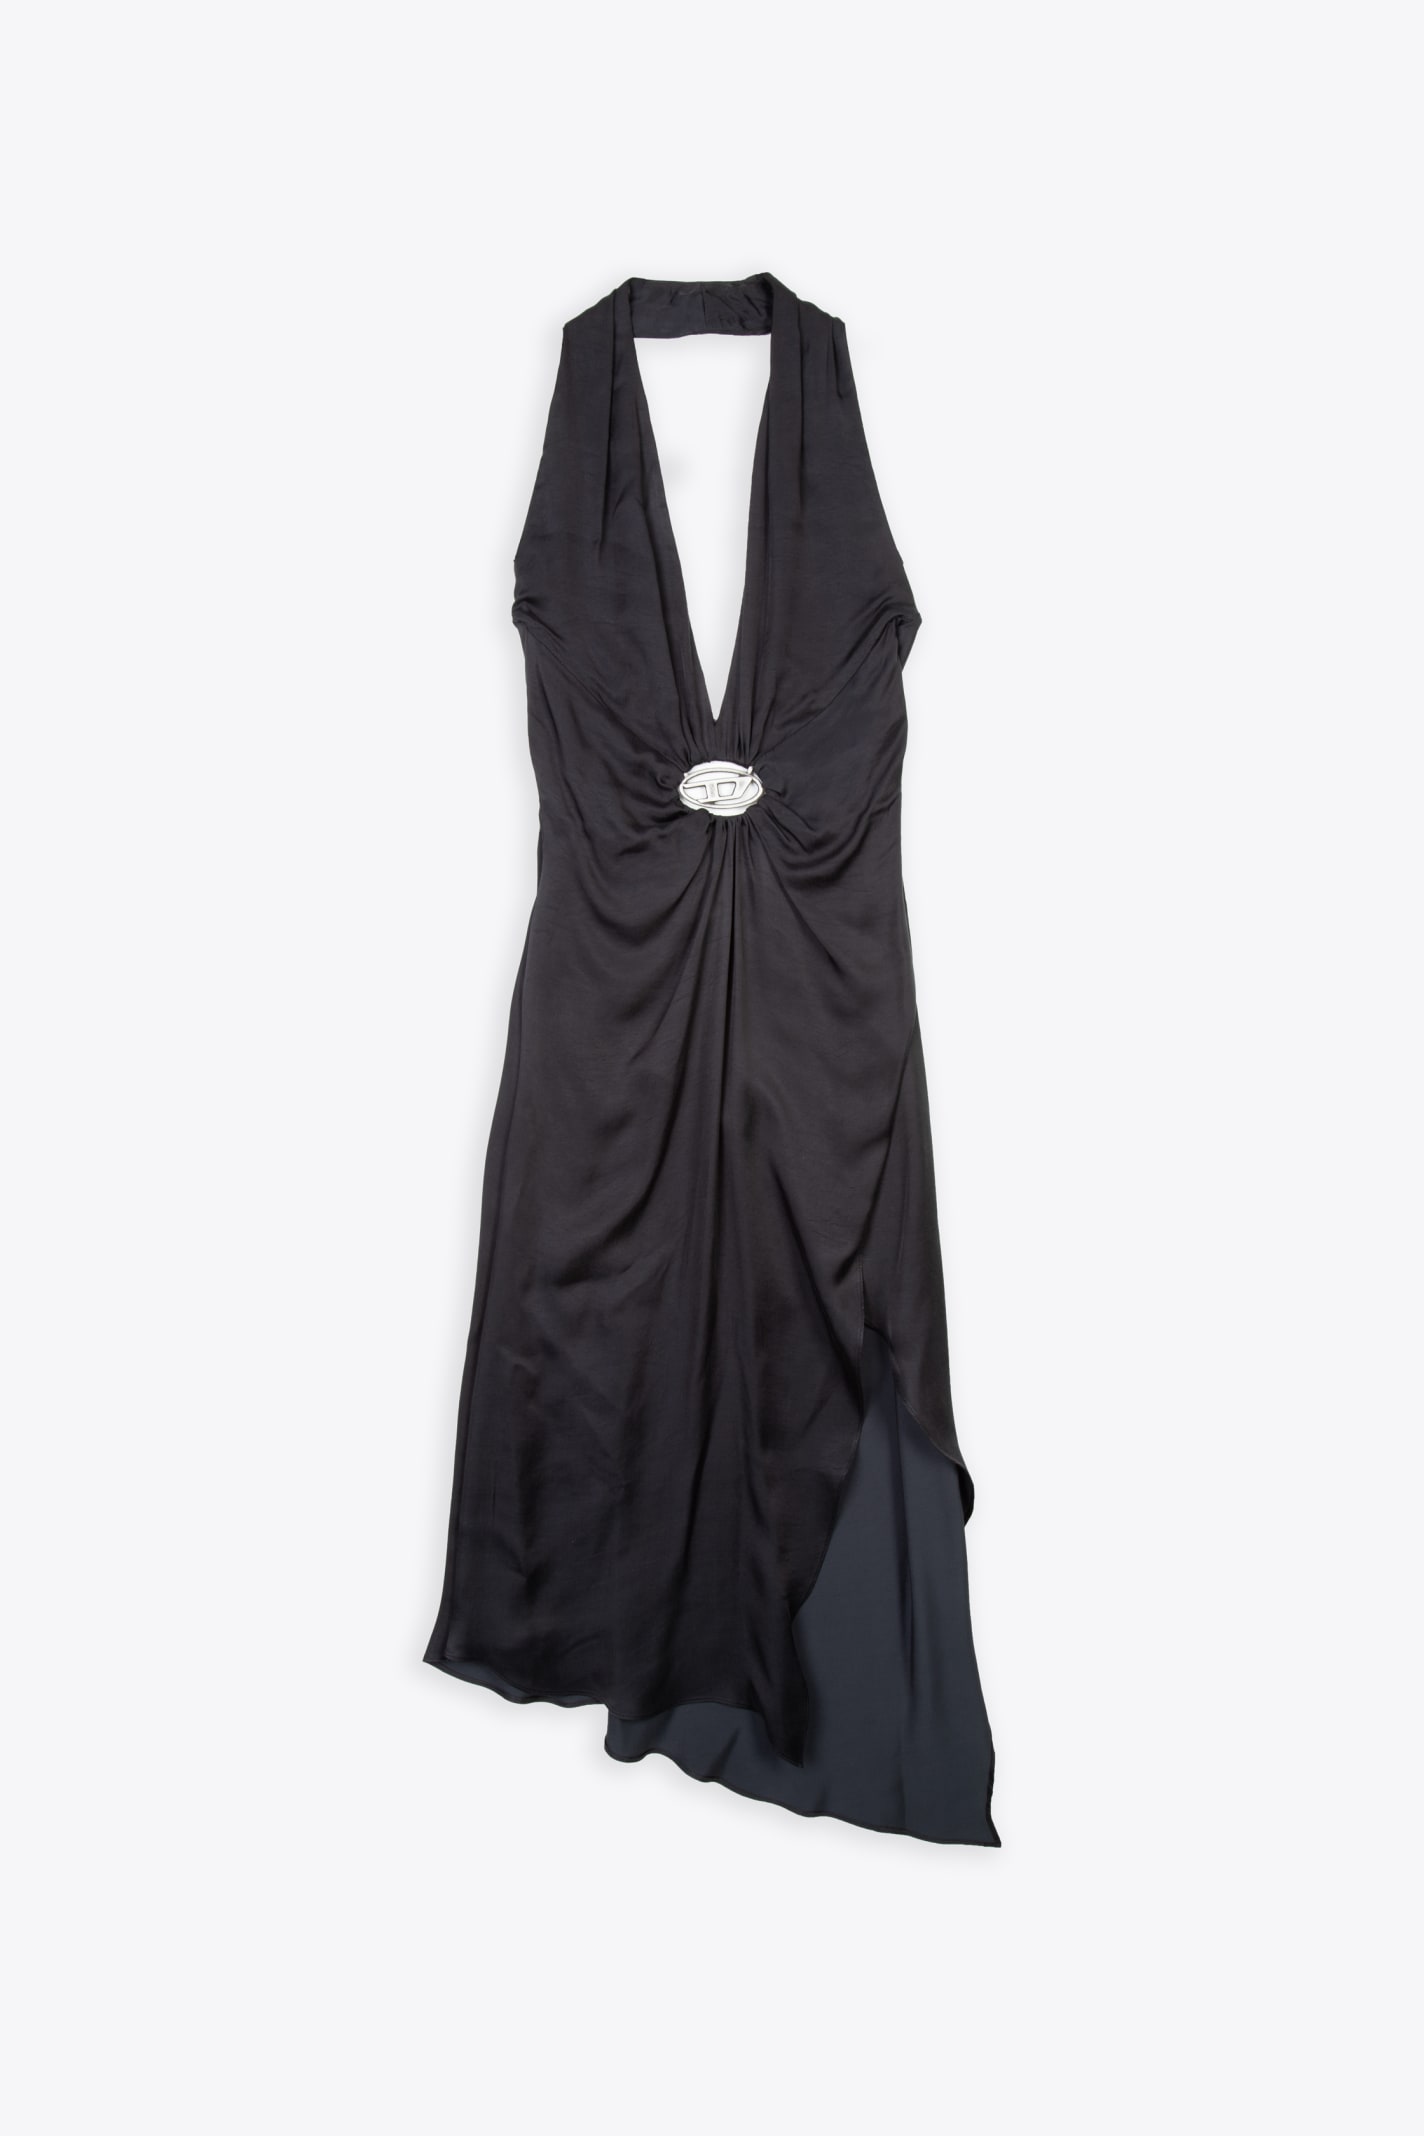 D-stant-n1 Black satin midi draped dress with Oval D - D Stant